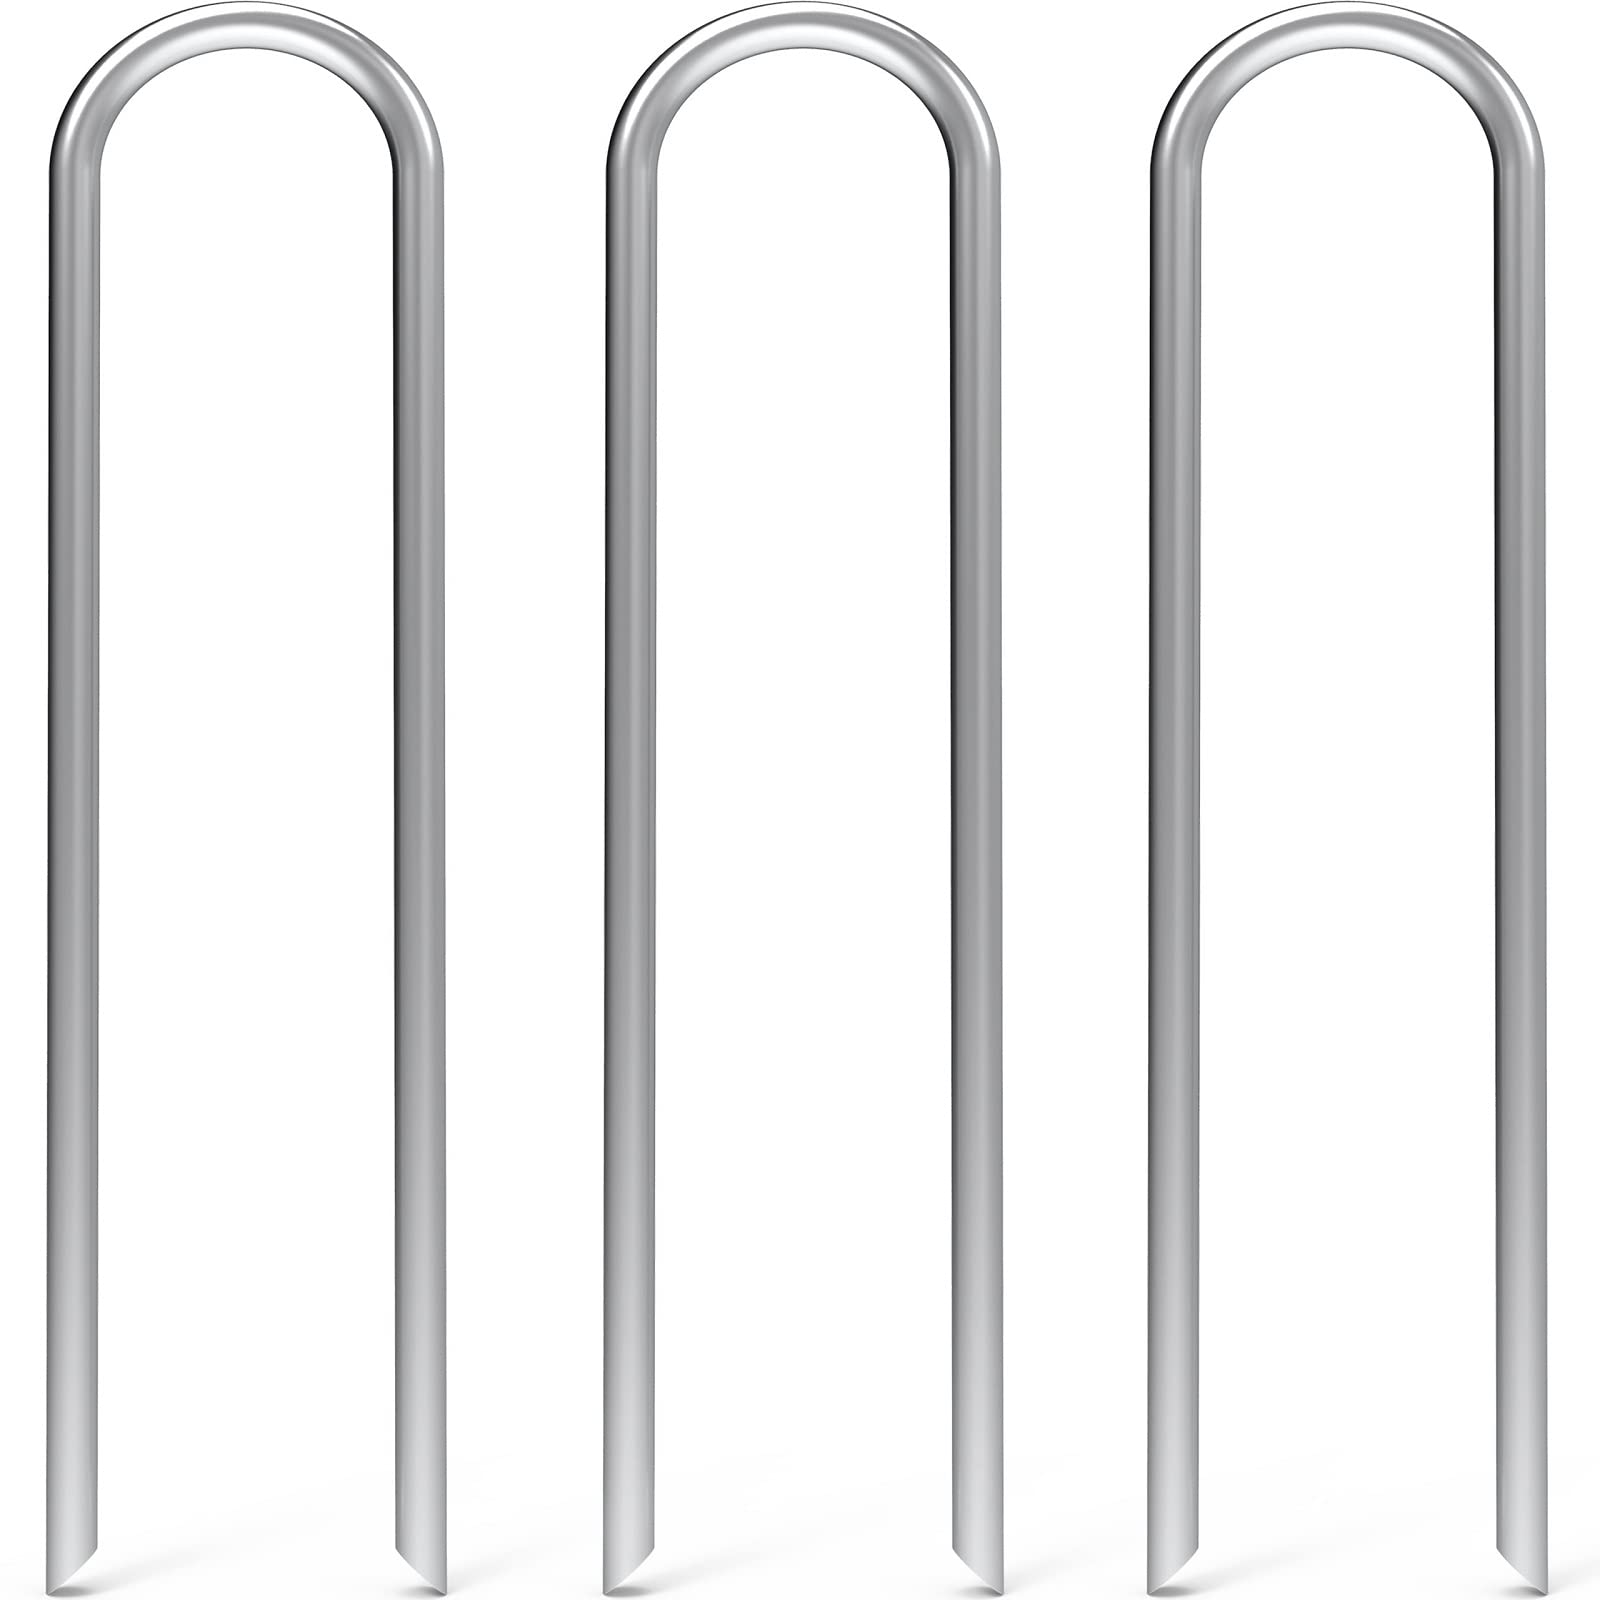 MySit 25 Pack 12 Inch Garden Stakes Heavy Duty 11 Gauge Galvanized Yard Staples U Pegs Fences Drip Irrigation Securing Stakes 1/2-Inch to 1-5/8-Inch Loop Stake for Anchoring Lawn Drippers Soaker Hose